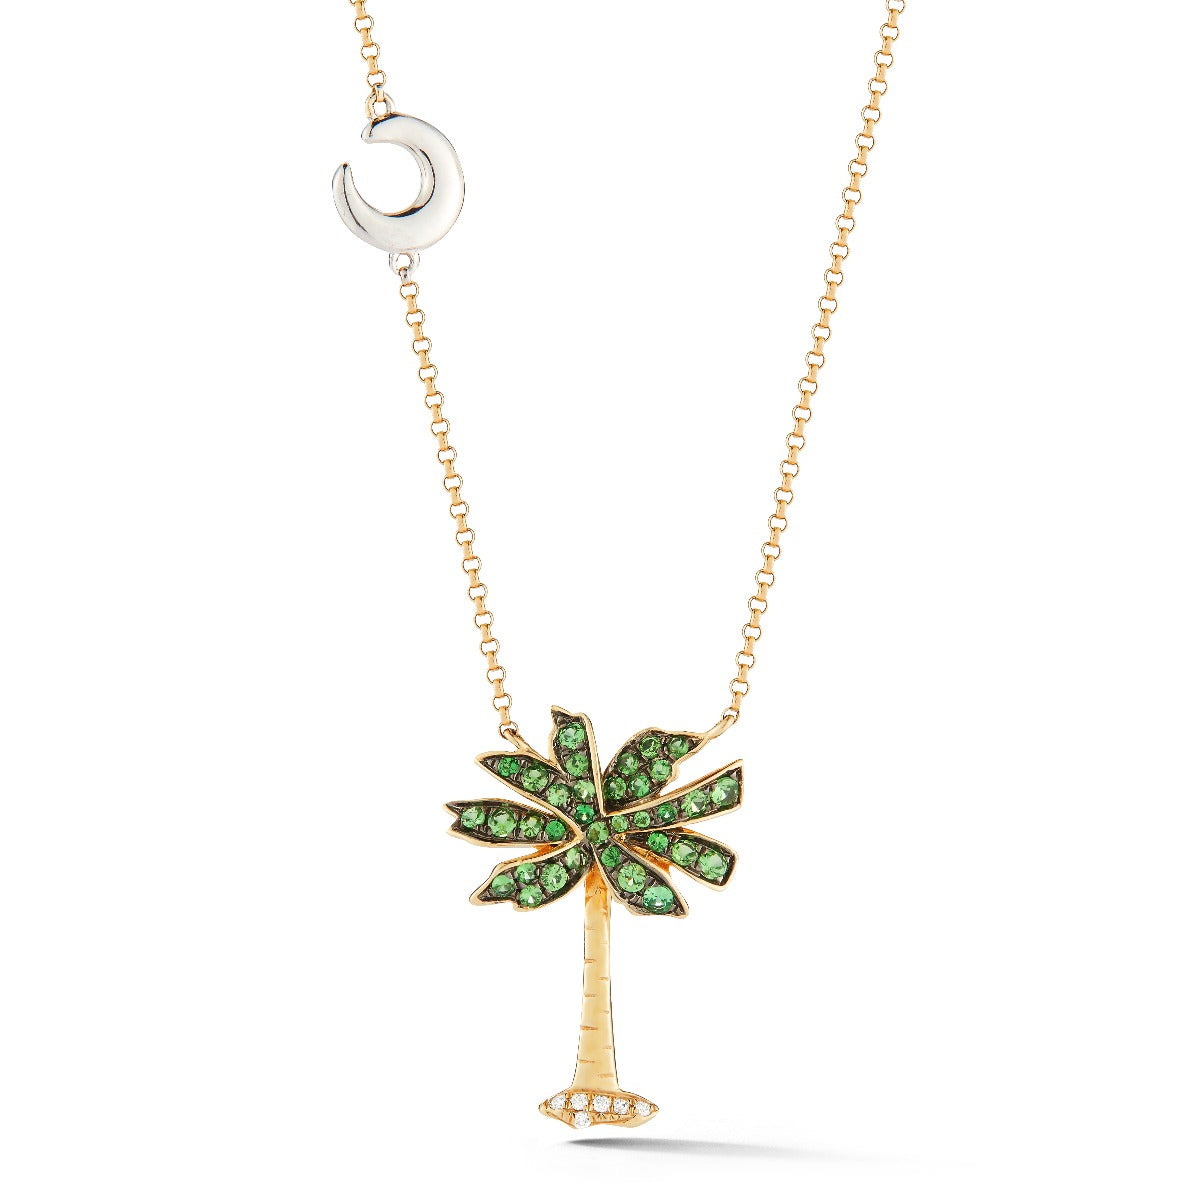 14K PALMETTO TREE PENDANT WITH 6 DIAMONDS 0.03CT & 34 GREEN GARNET 0.44CT AND SMALL MOON DETAIL ON 18 INCHES CABLE CHAIN